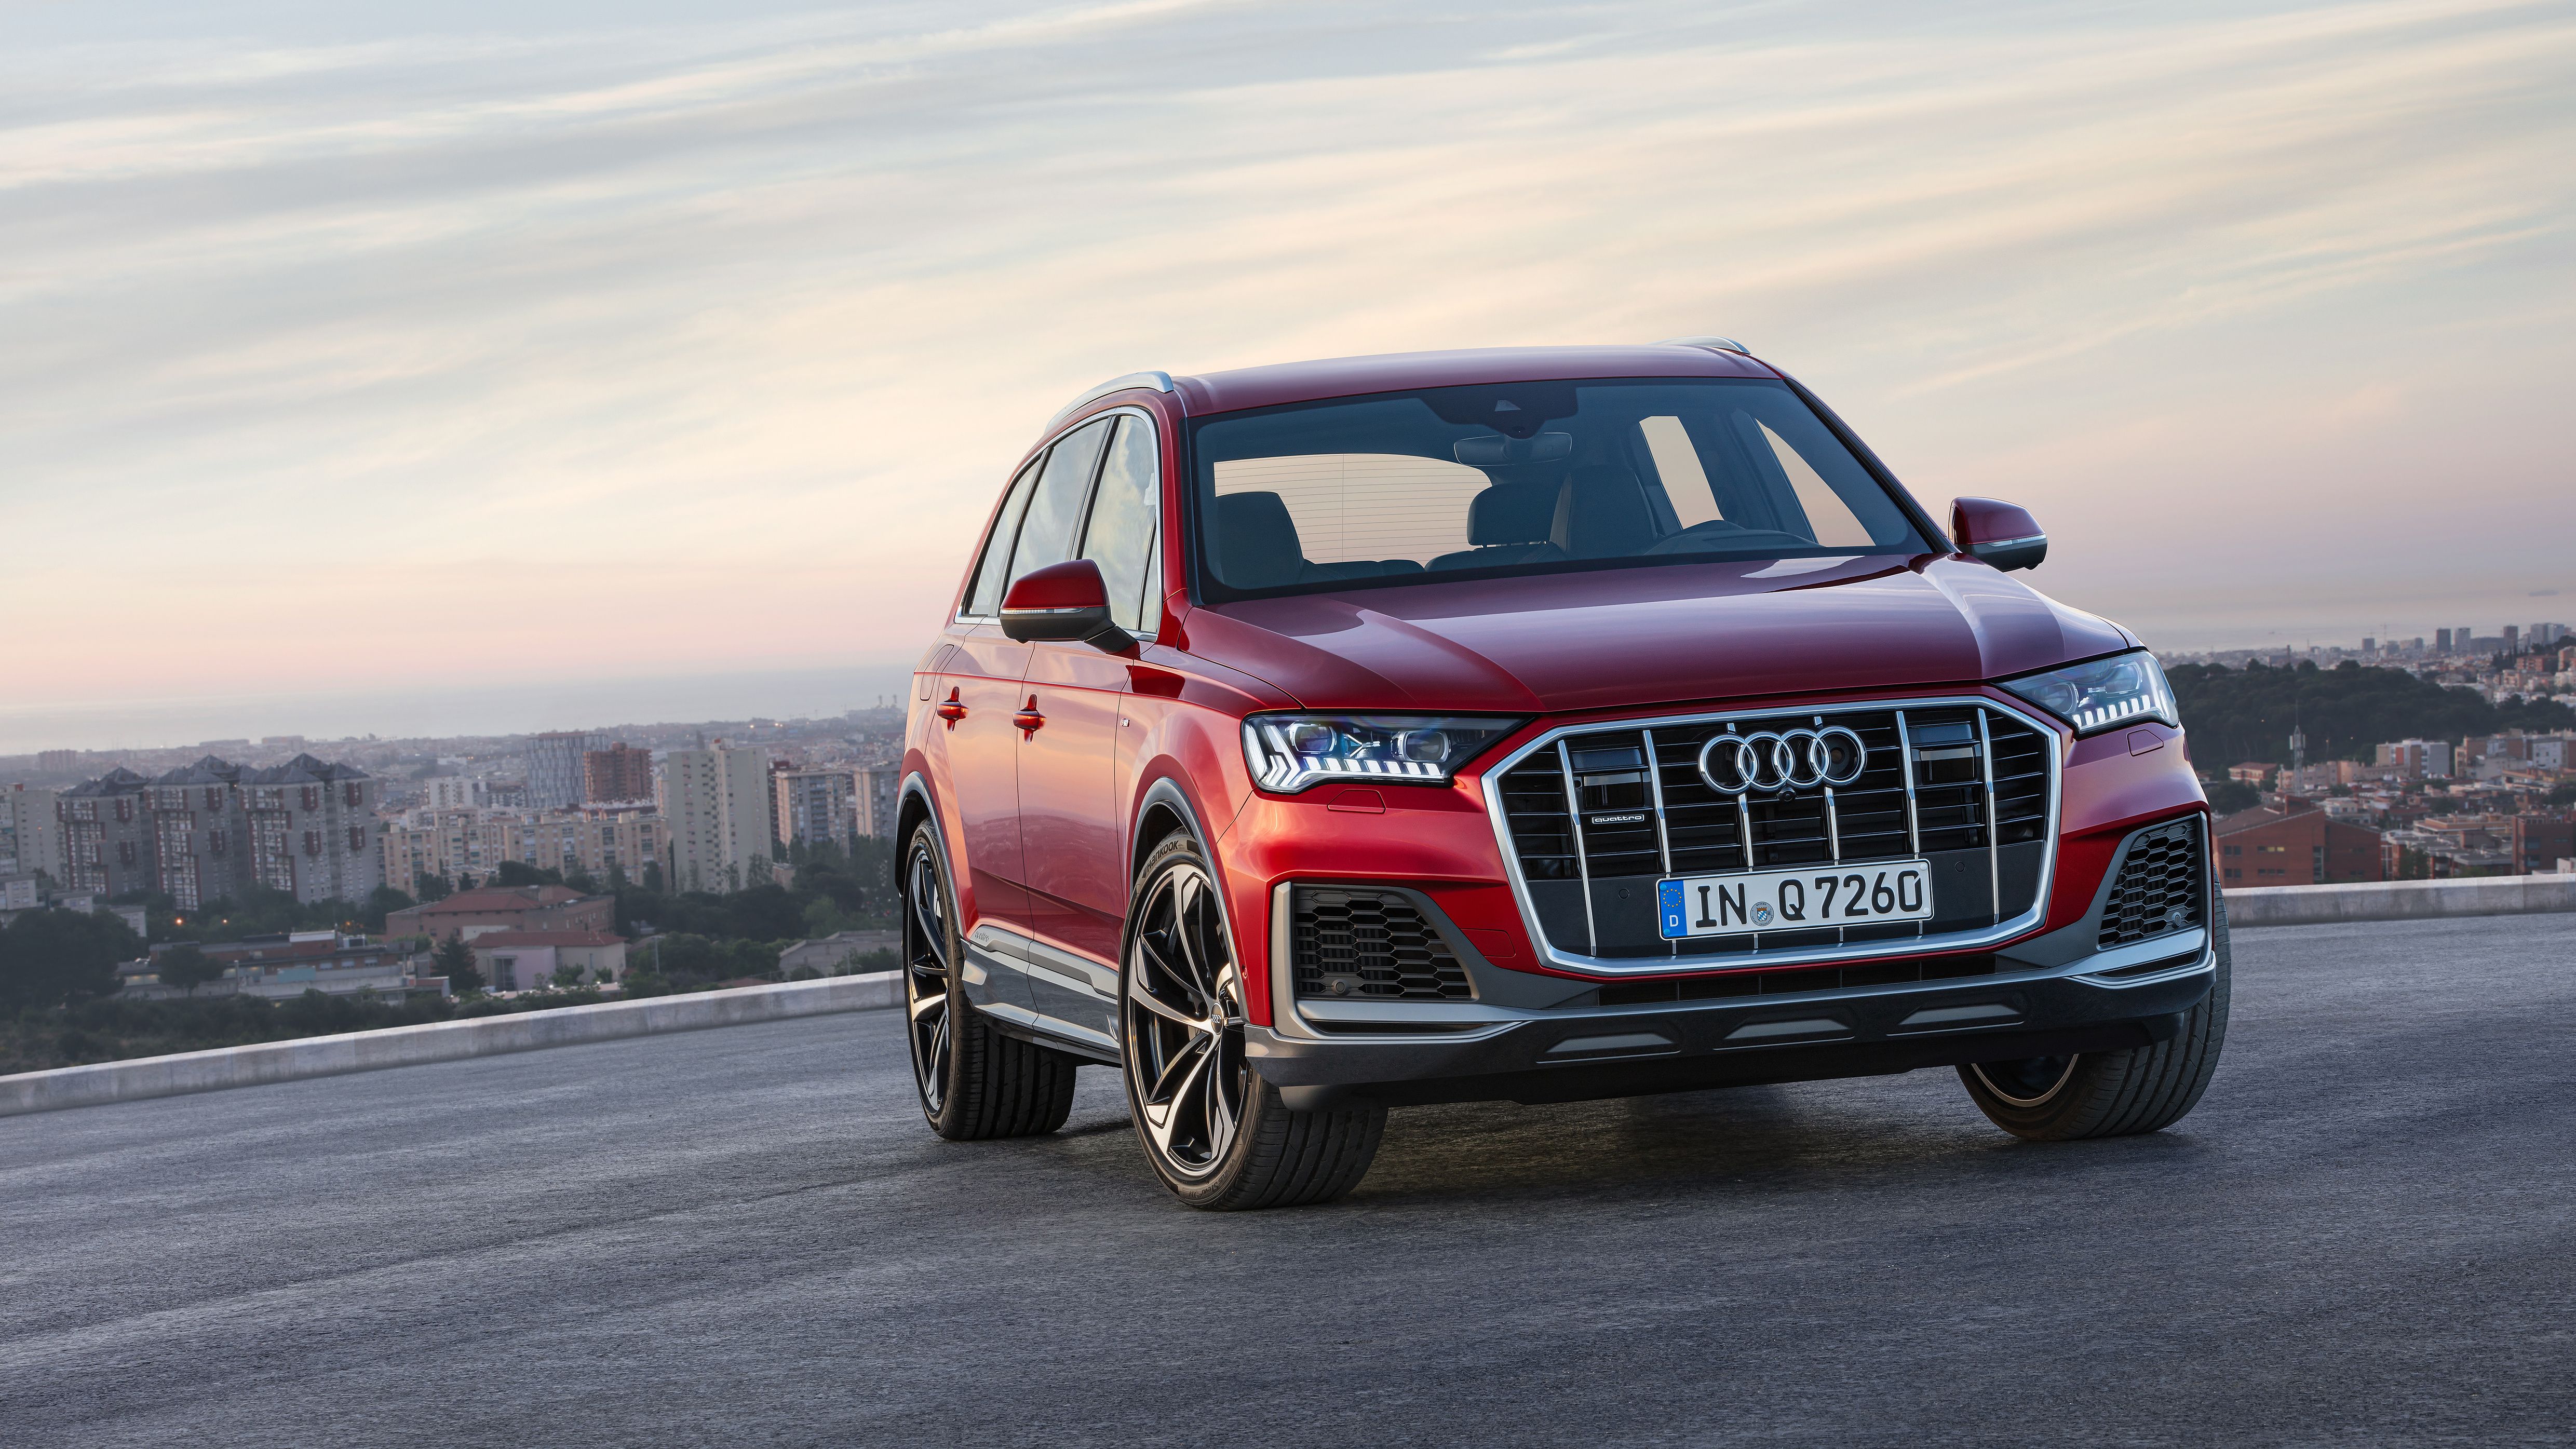 The 2020 Audi Q7 Has An Updated Design And New Tech, But Does It